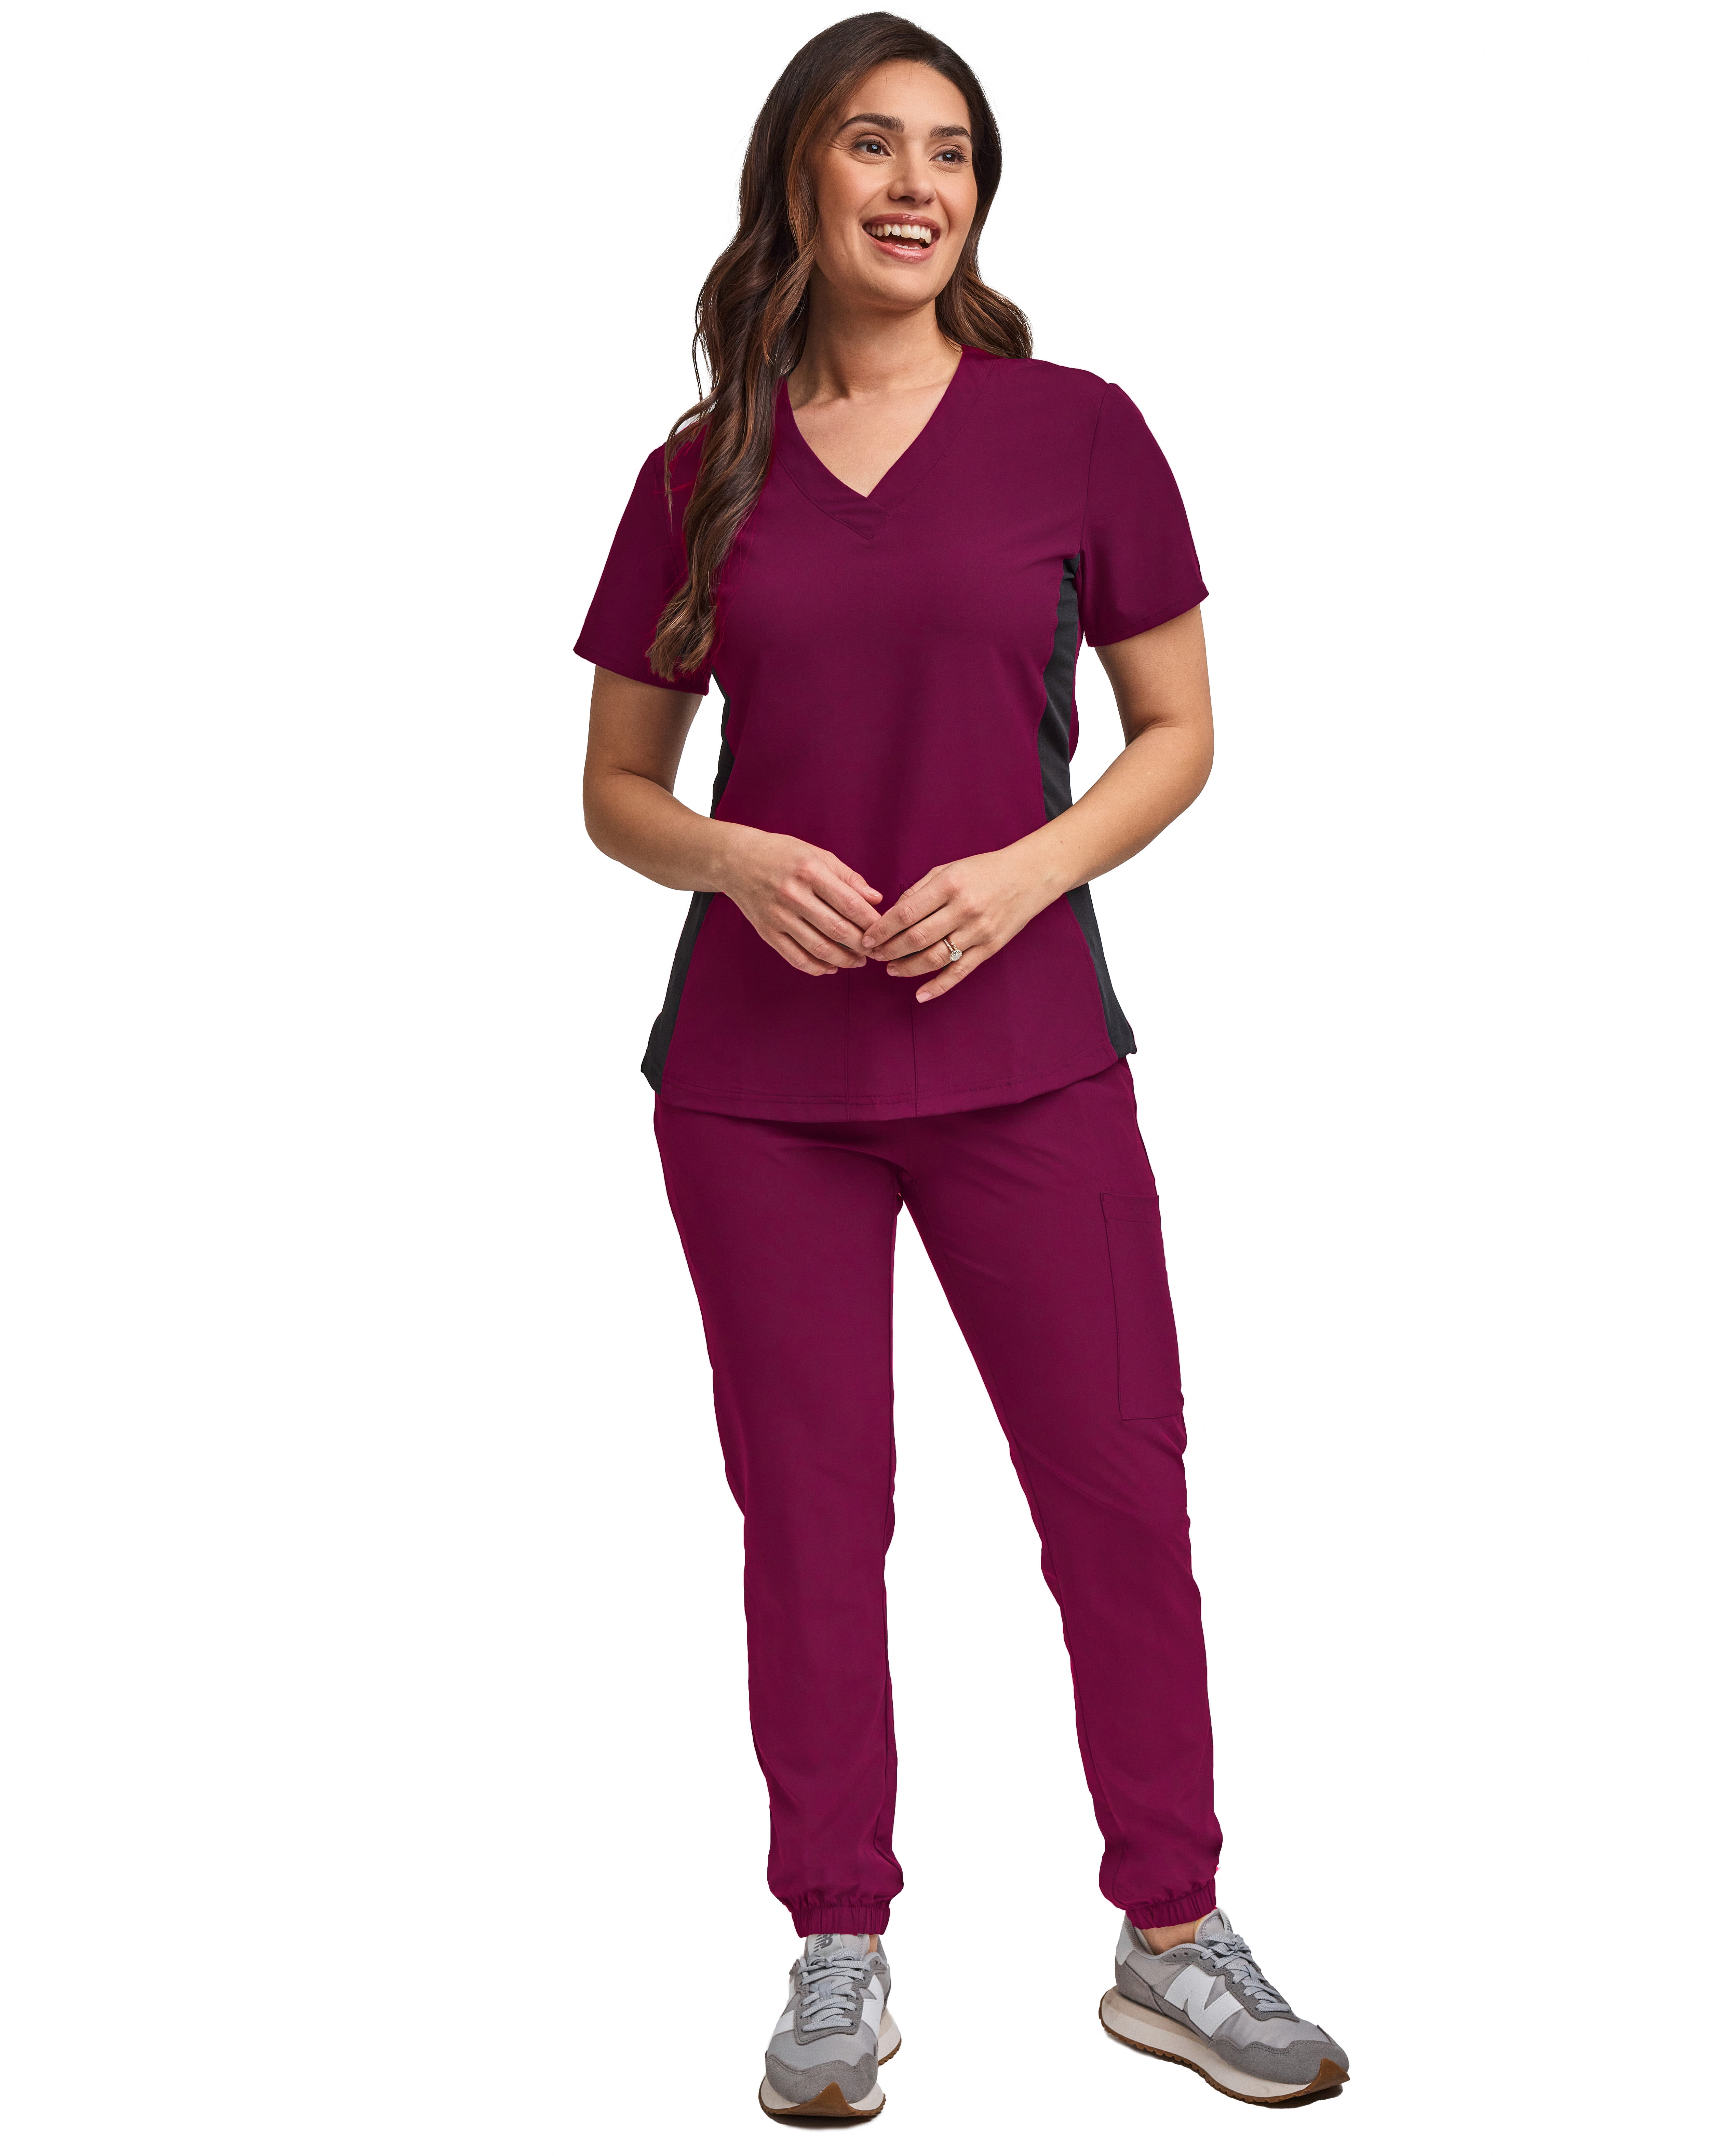 Green Town Scrubs for Women Scrub Set - Jogger Pant and Comfort